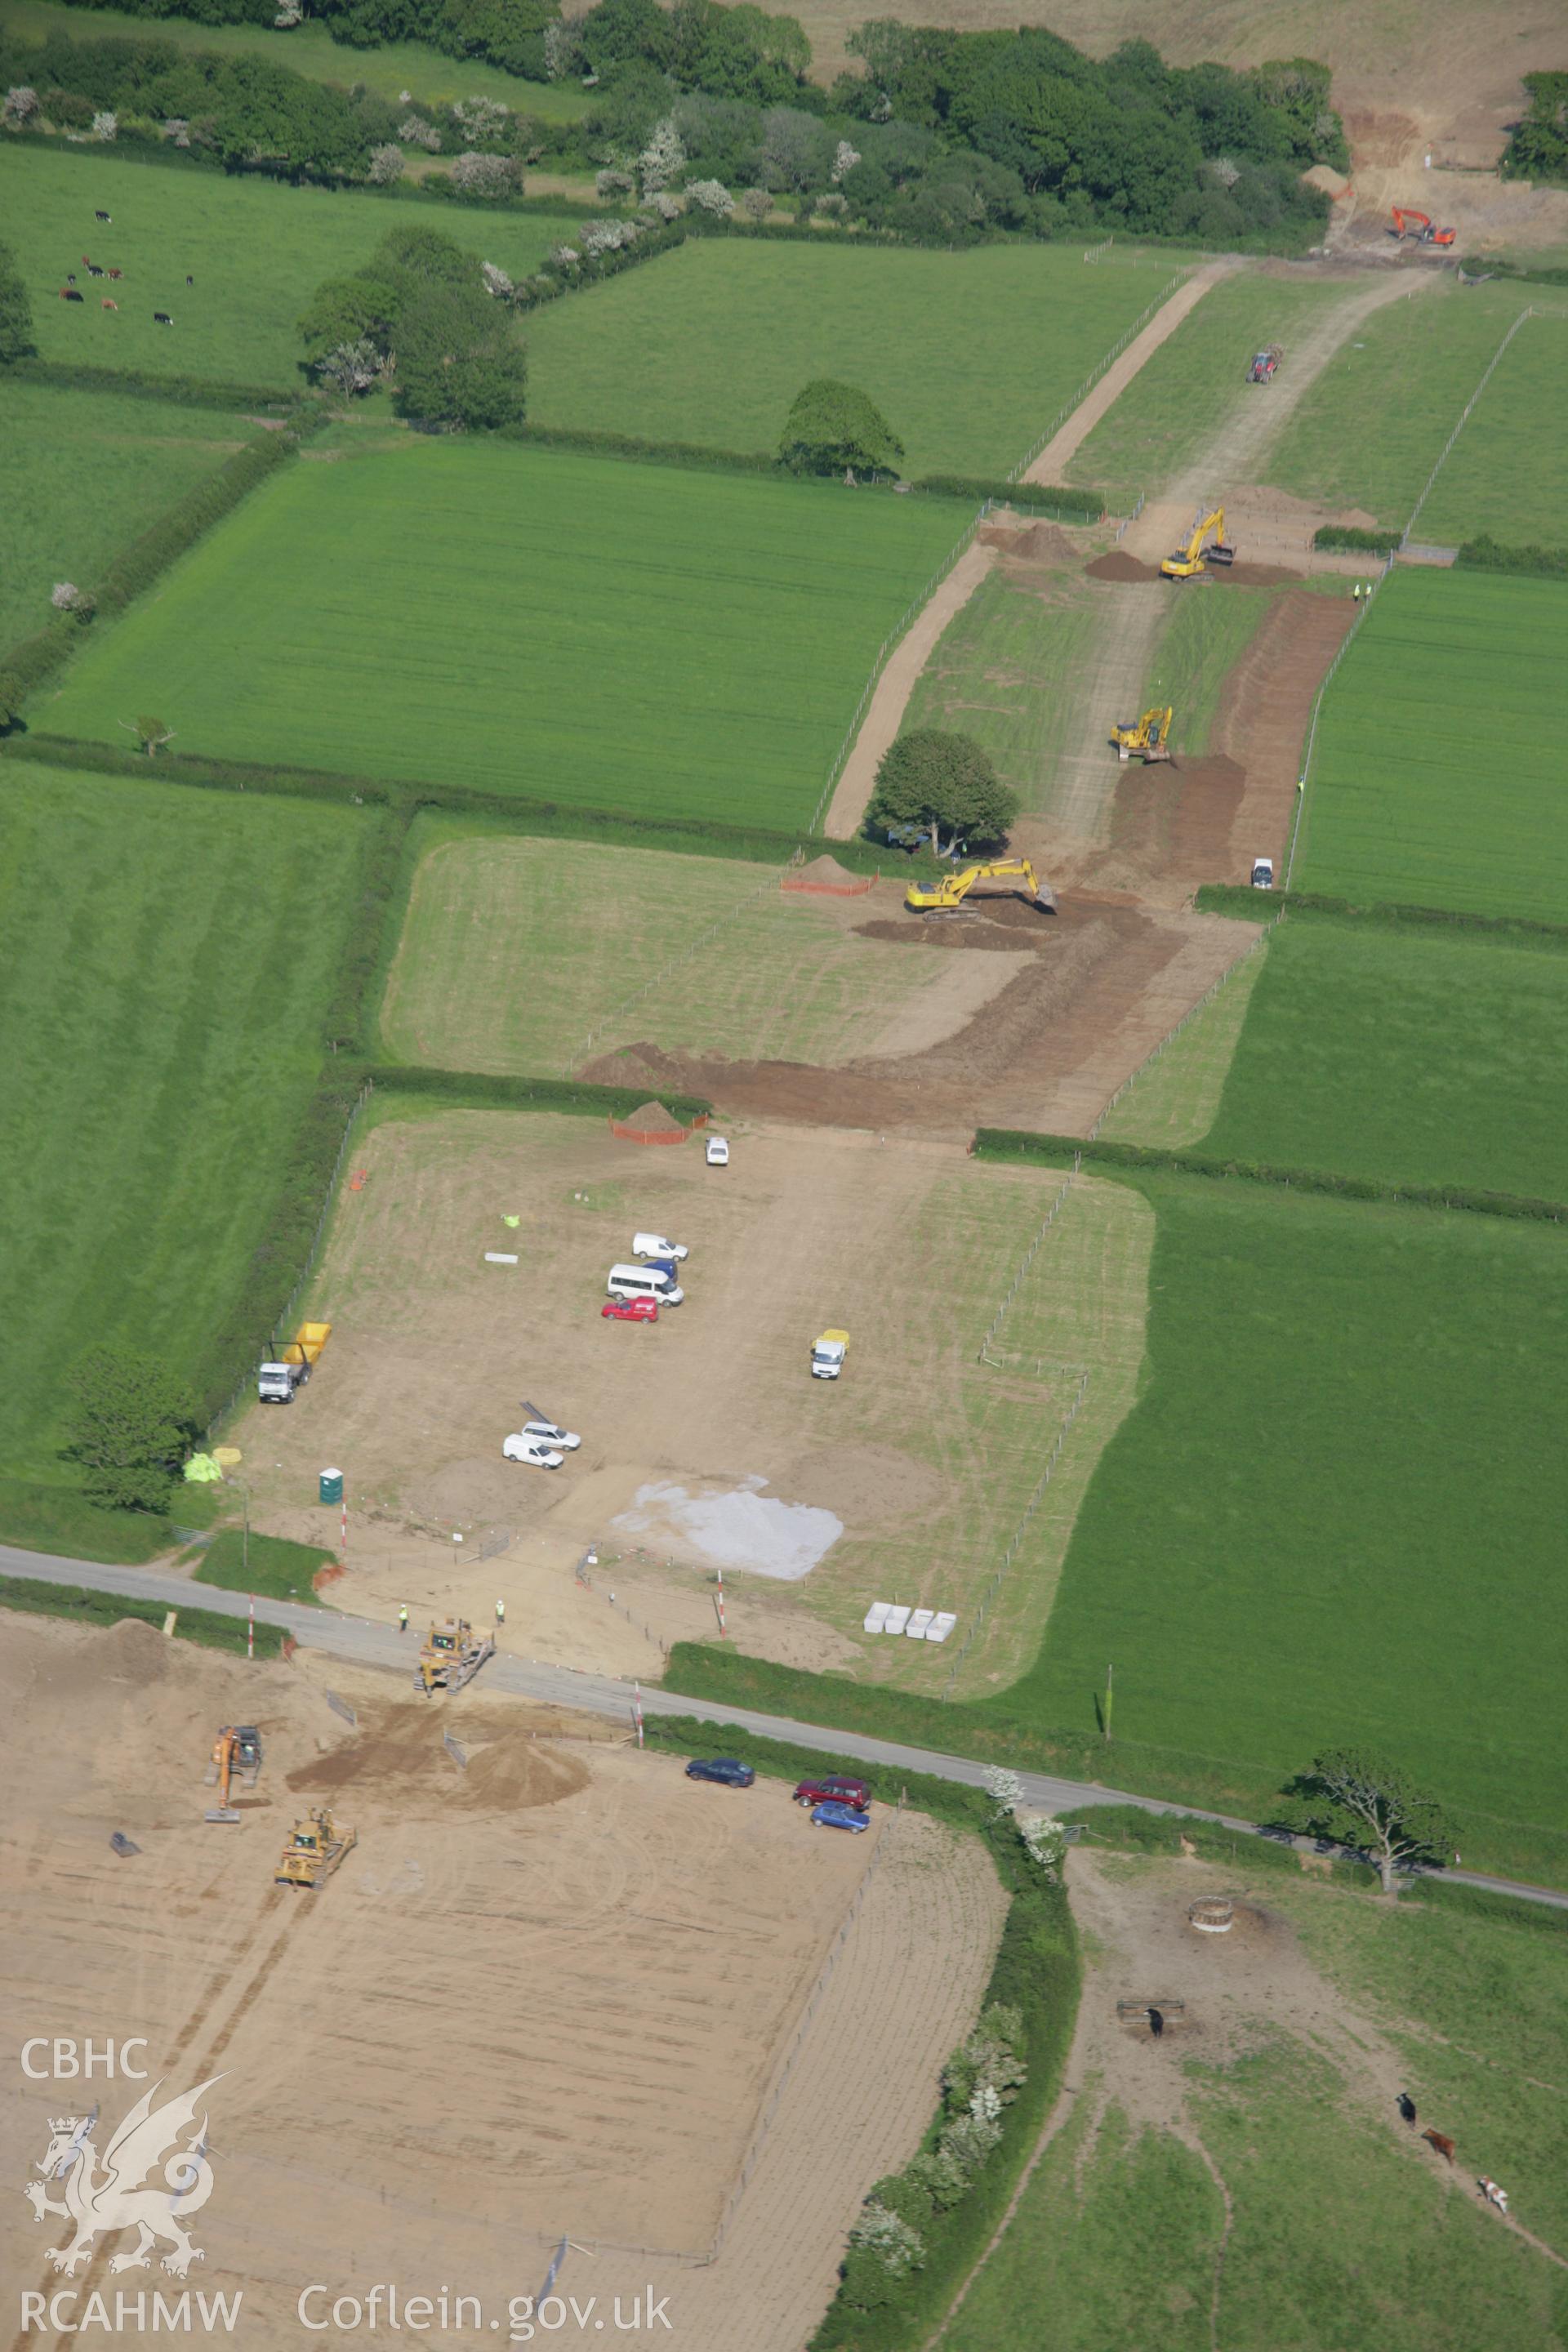 RCAHMW colour oblique aerial photograph of LNG Natural Gas Pipeline, under construction at Tavernspite, viewed looking to the east. Taken on 08 June 2006 by Toby Driver